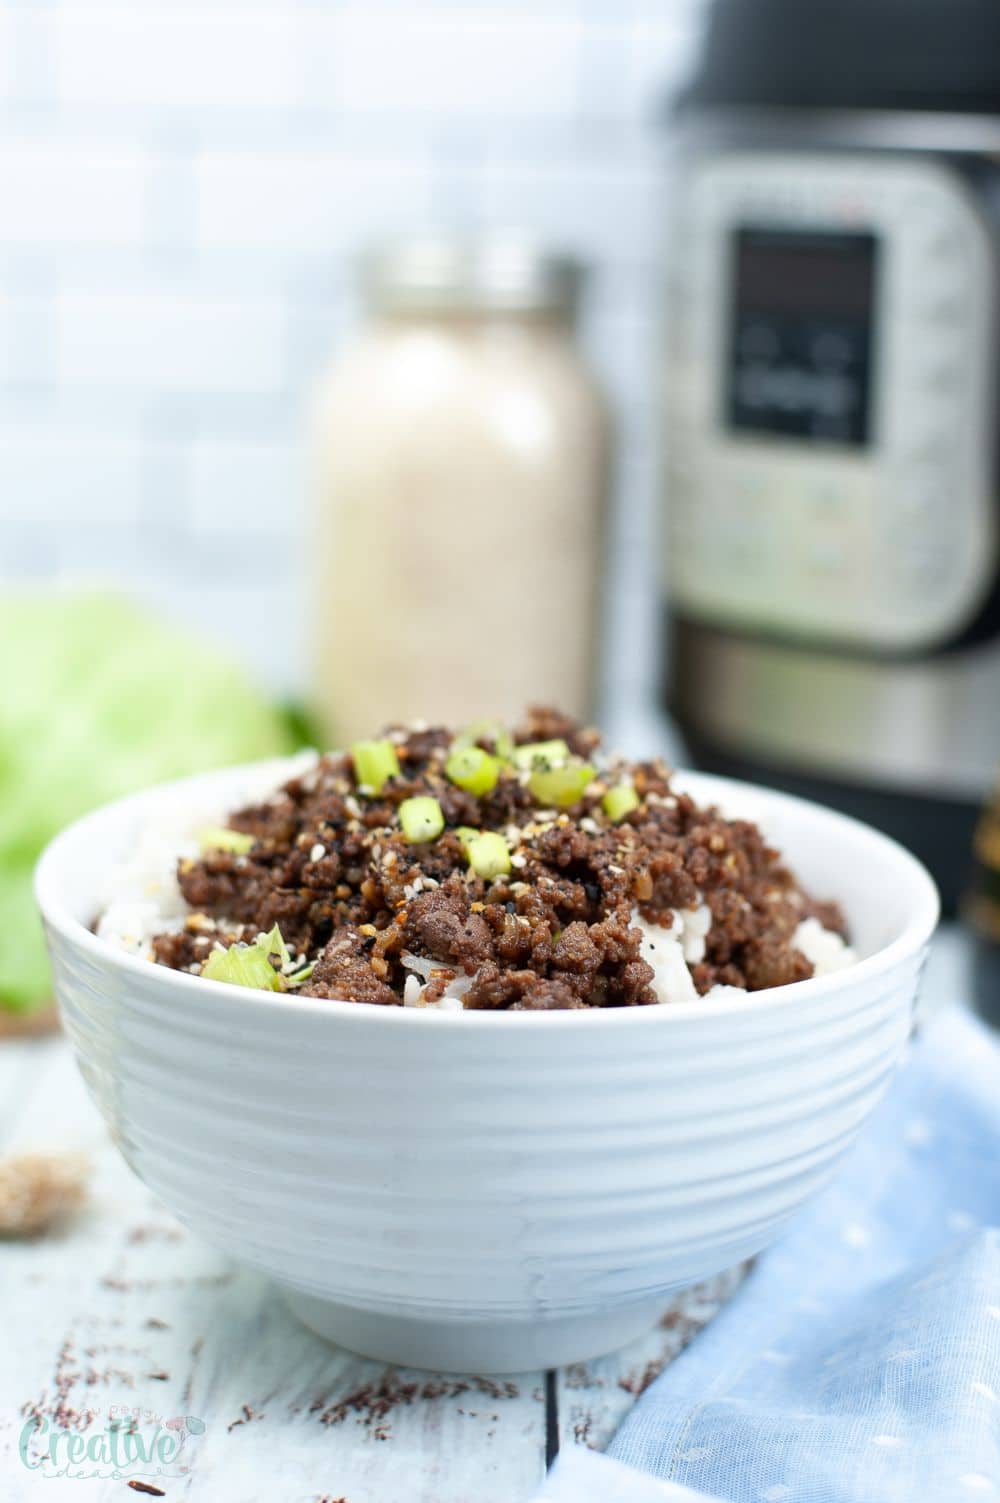 Image of a white bowl filled with Korean ground beef on rice